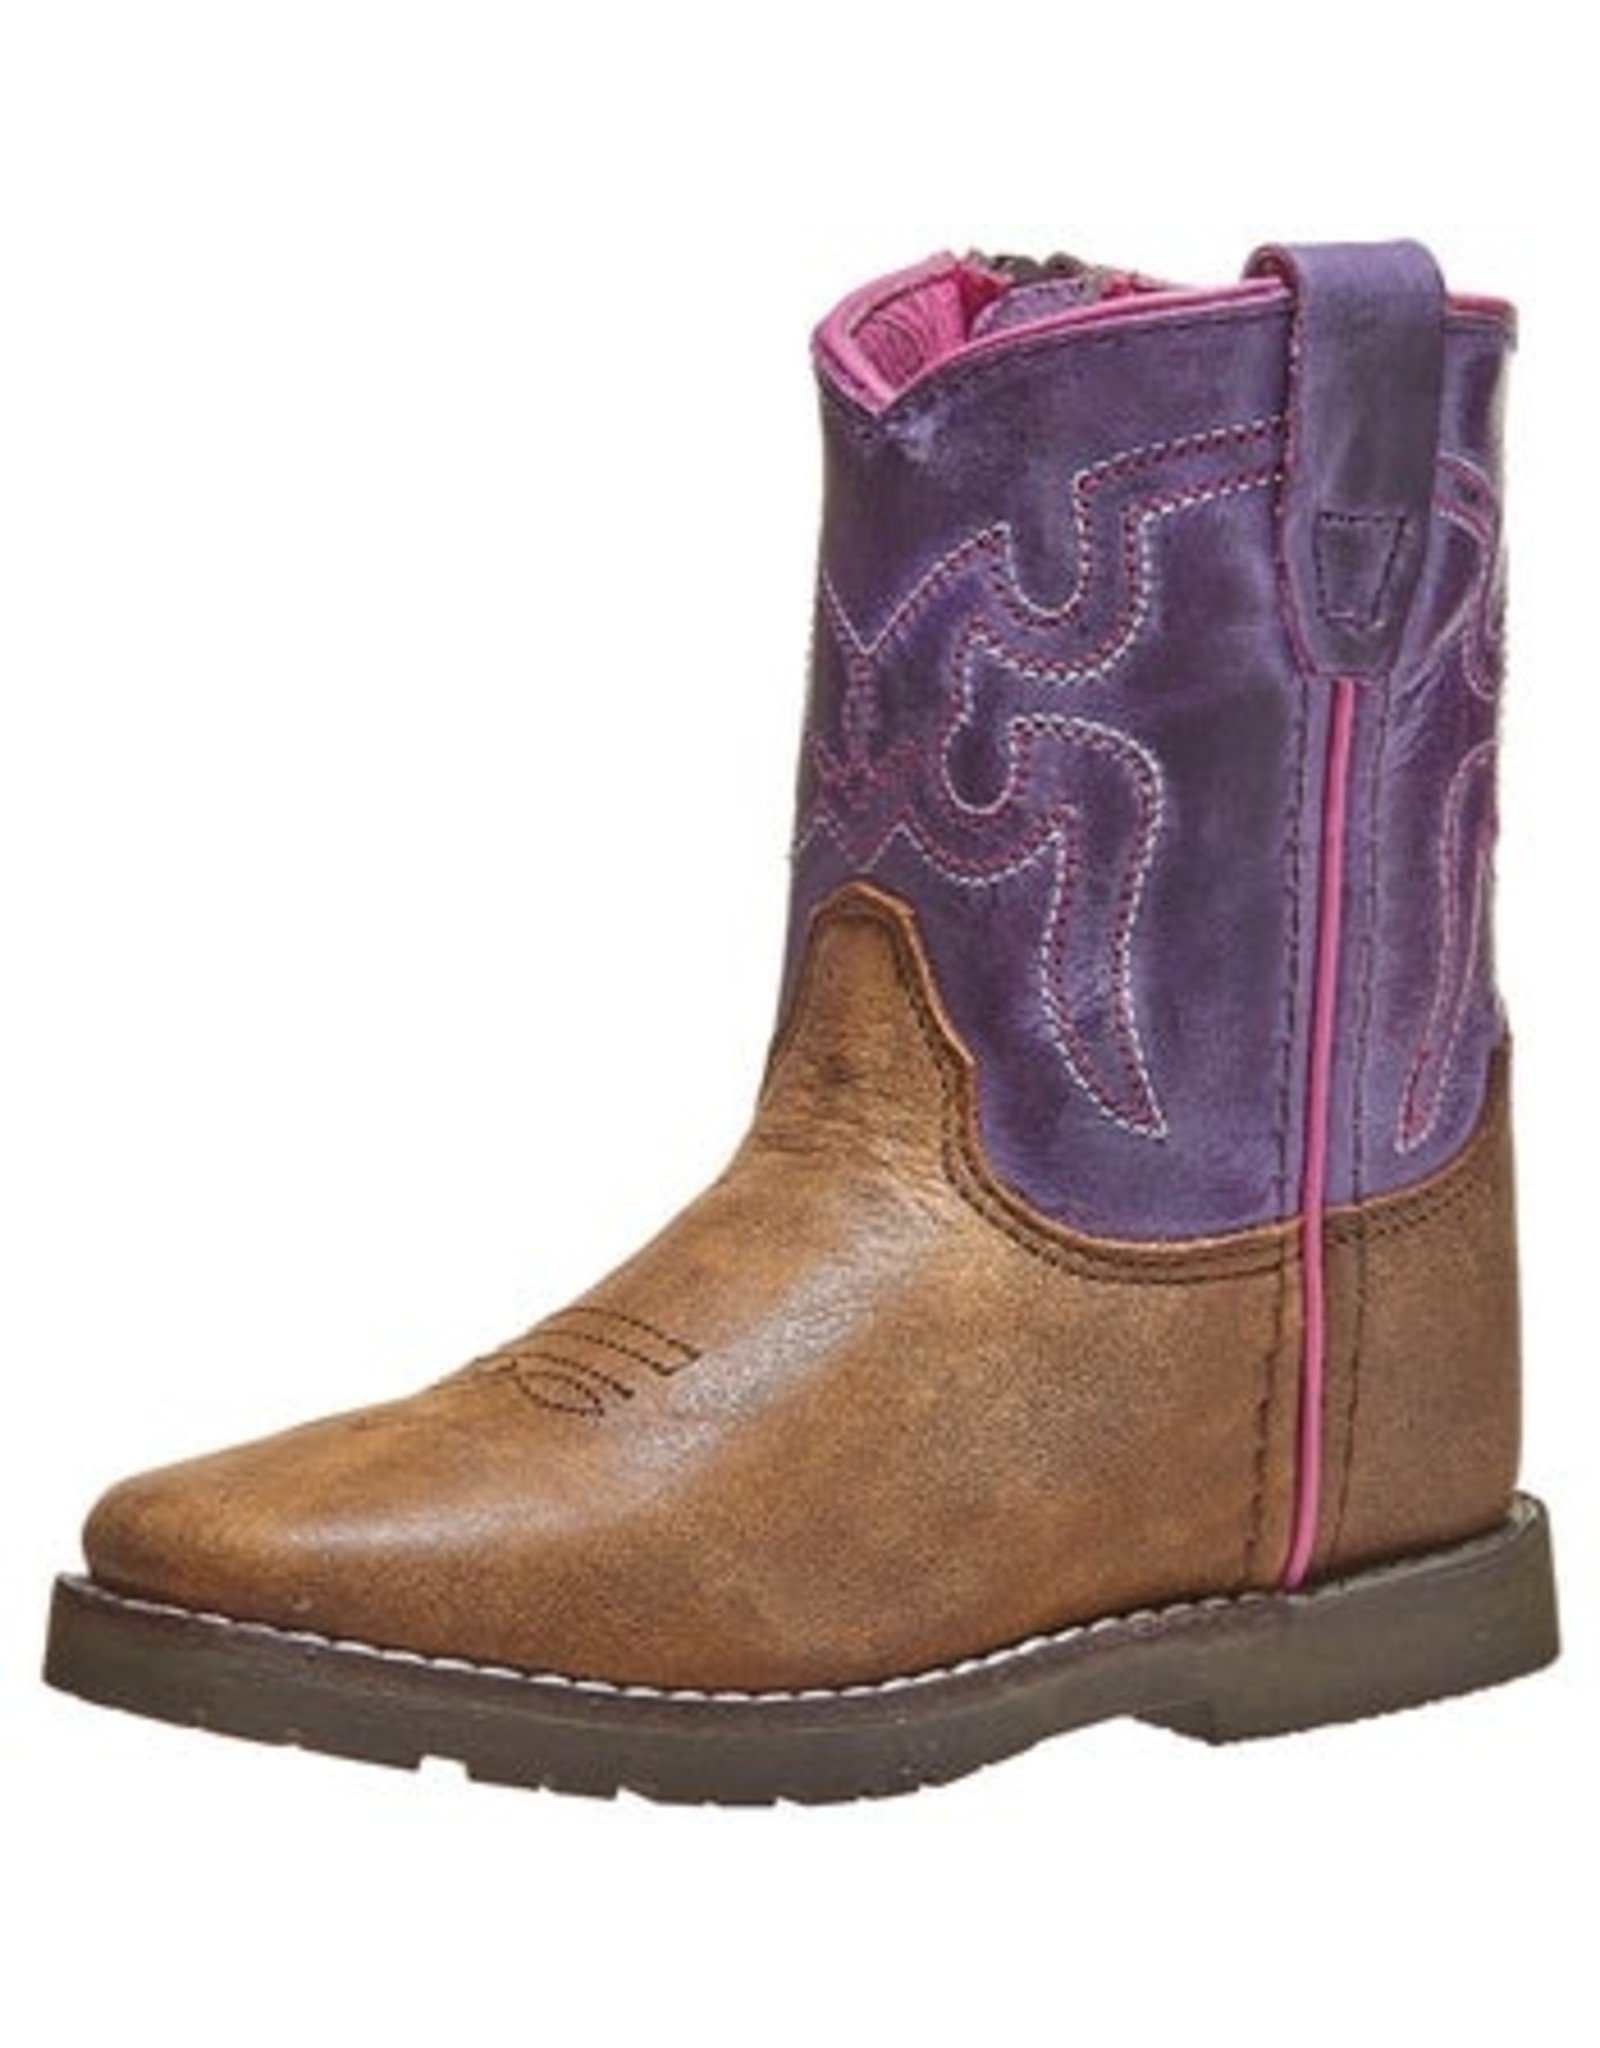 Boots-Children SMOKY MOUNTAIN 3123T